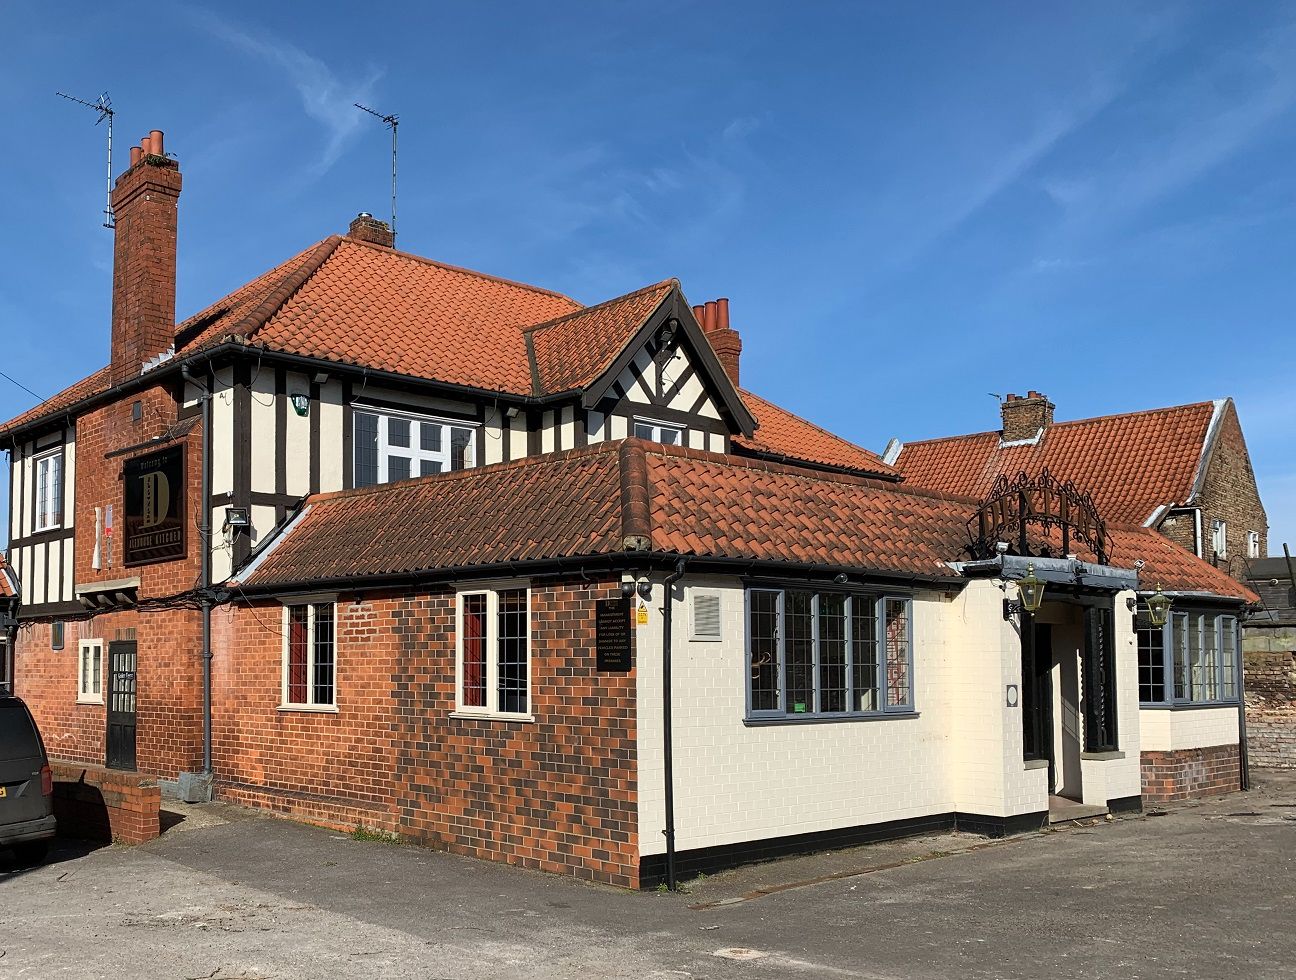 Planning permission granted to convert The Golden Fleece pub to 3 new homes in Louth, Lincolnshire. Planning Application by Fytche-Taylor Planning. 